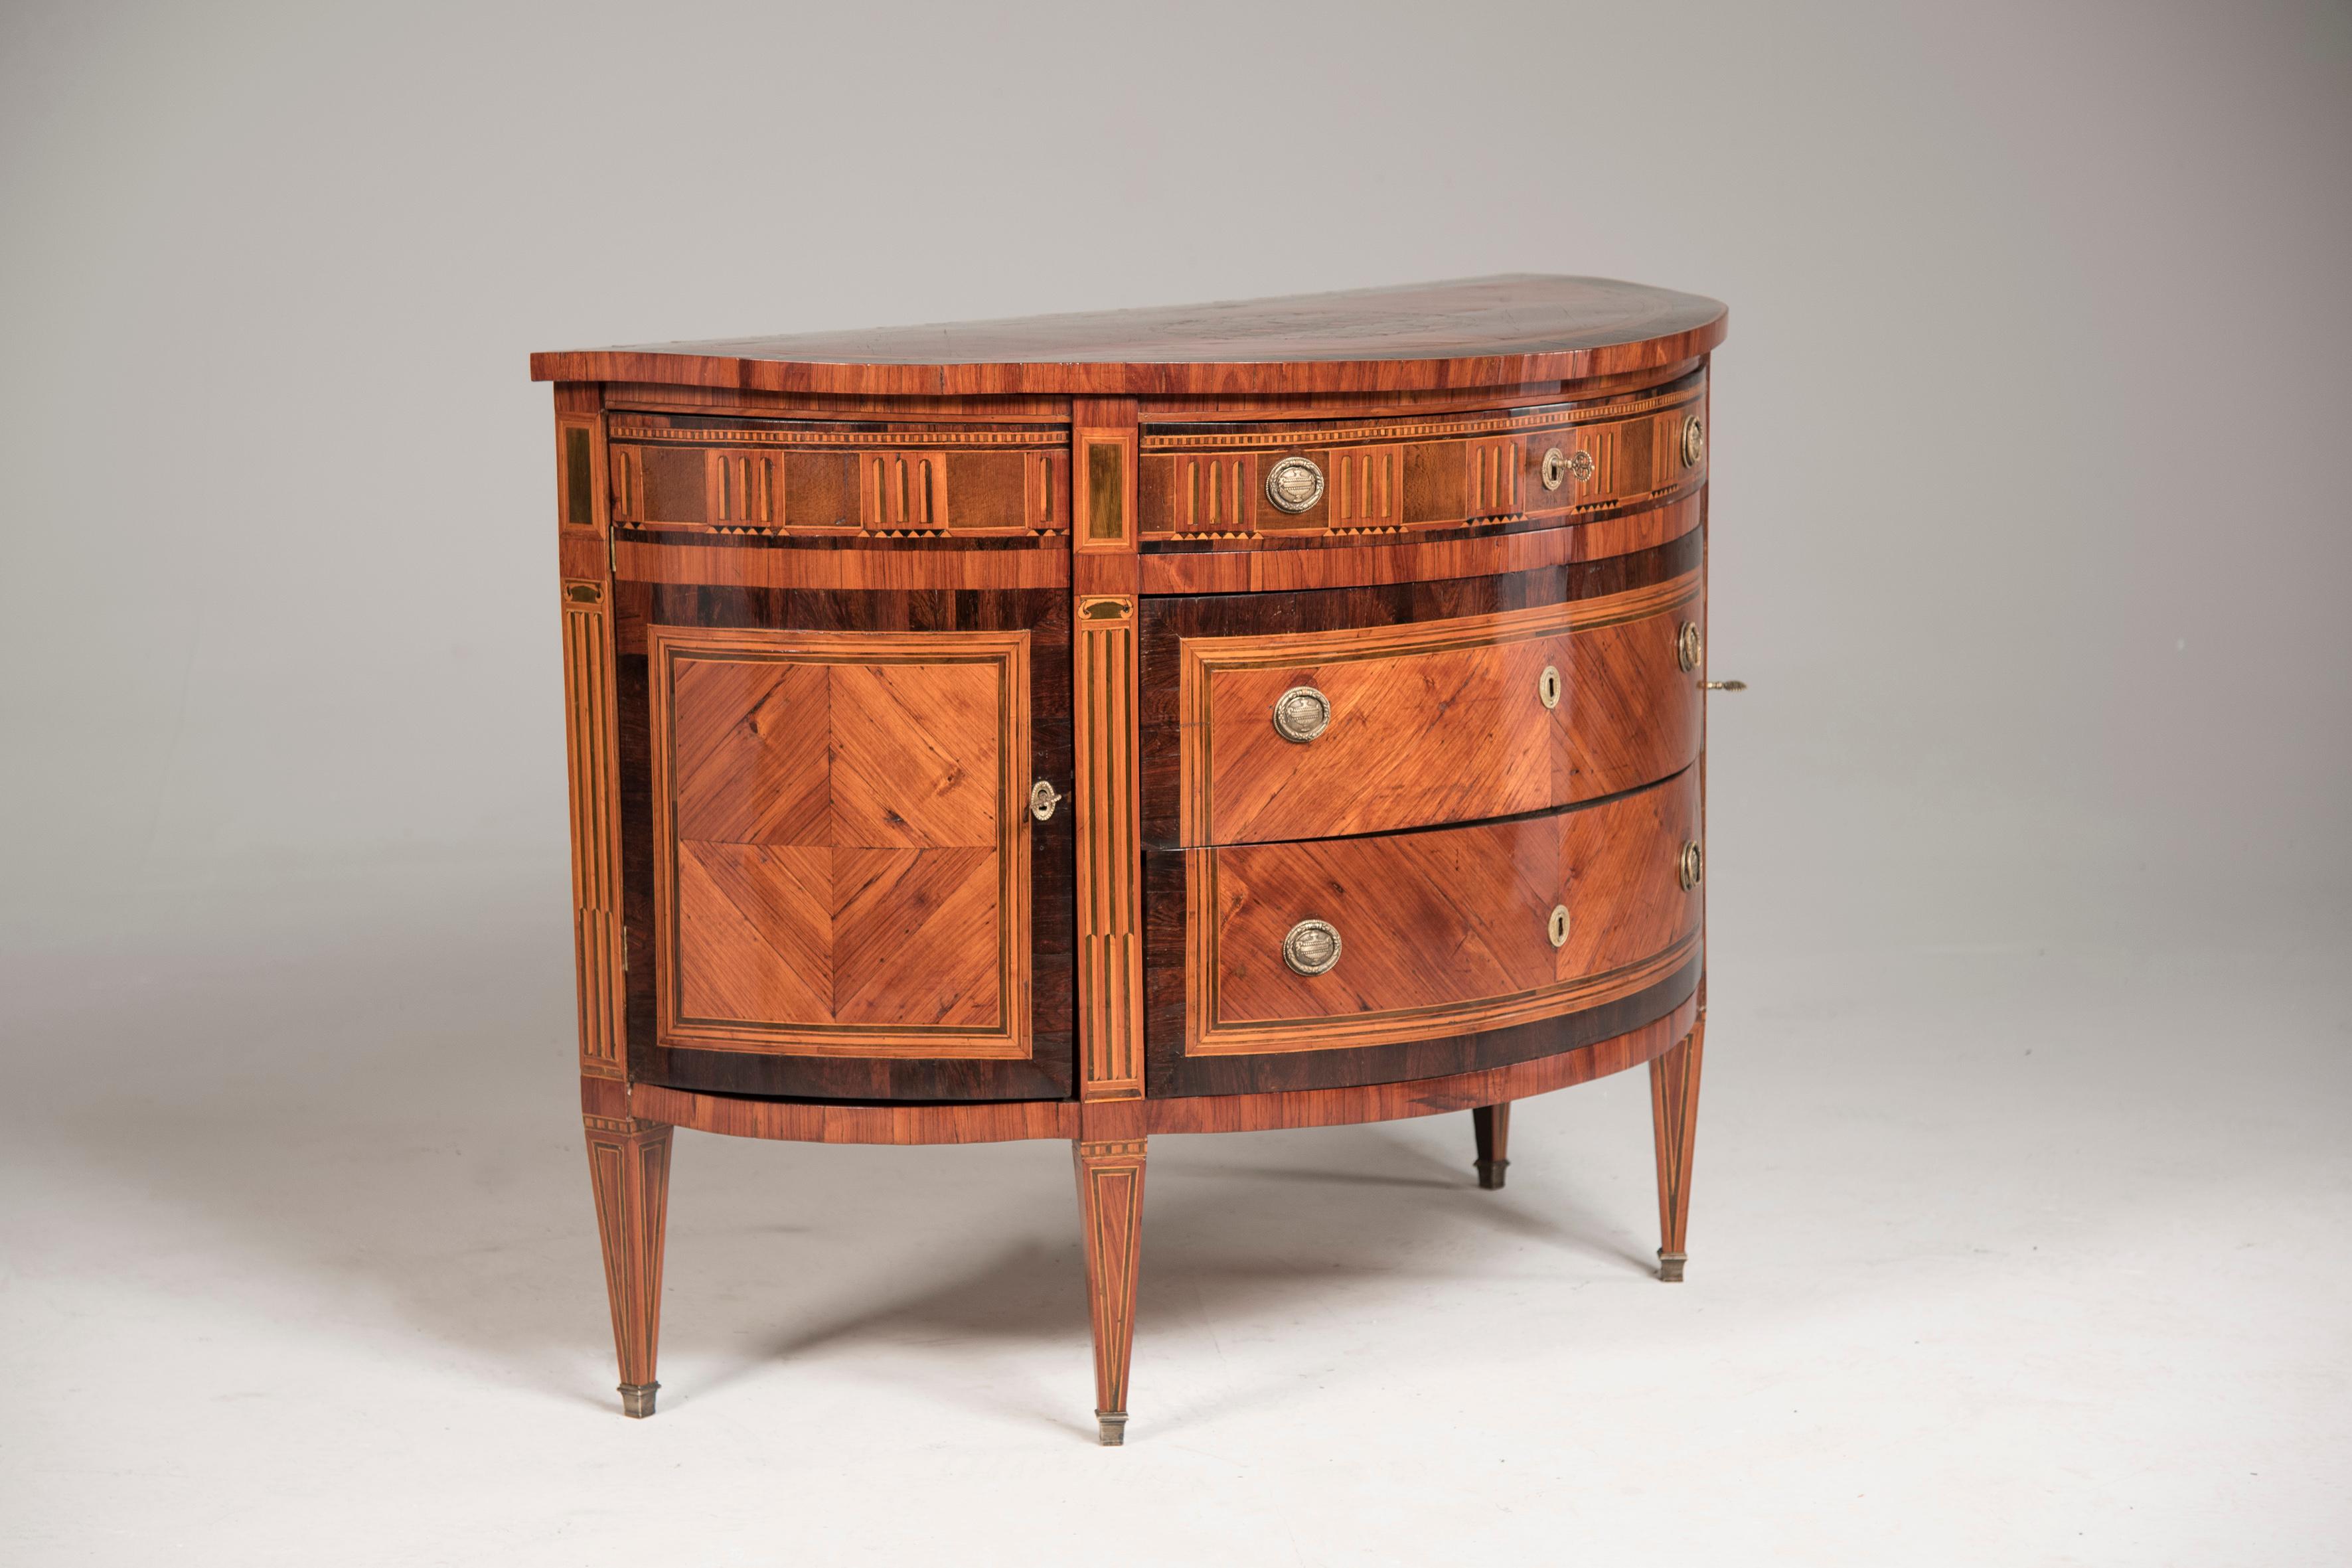 This 18th century French Louis XVI demilune (half moon) shaped marquetry sideboard or chest of drawers dates back to Louis XVI period (1774 -1791) and it features great scale, perfect proportions and stunning high craftsmanship marquetry inlays in